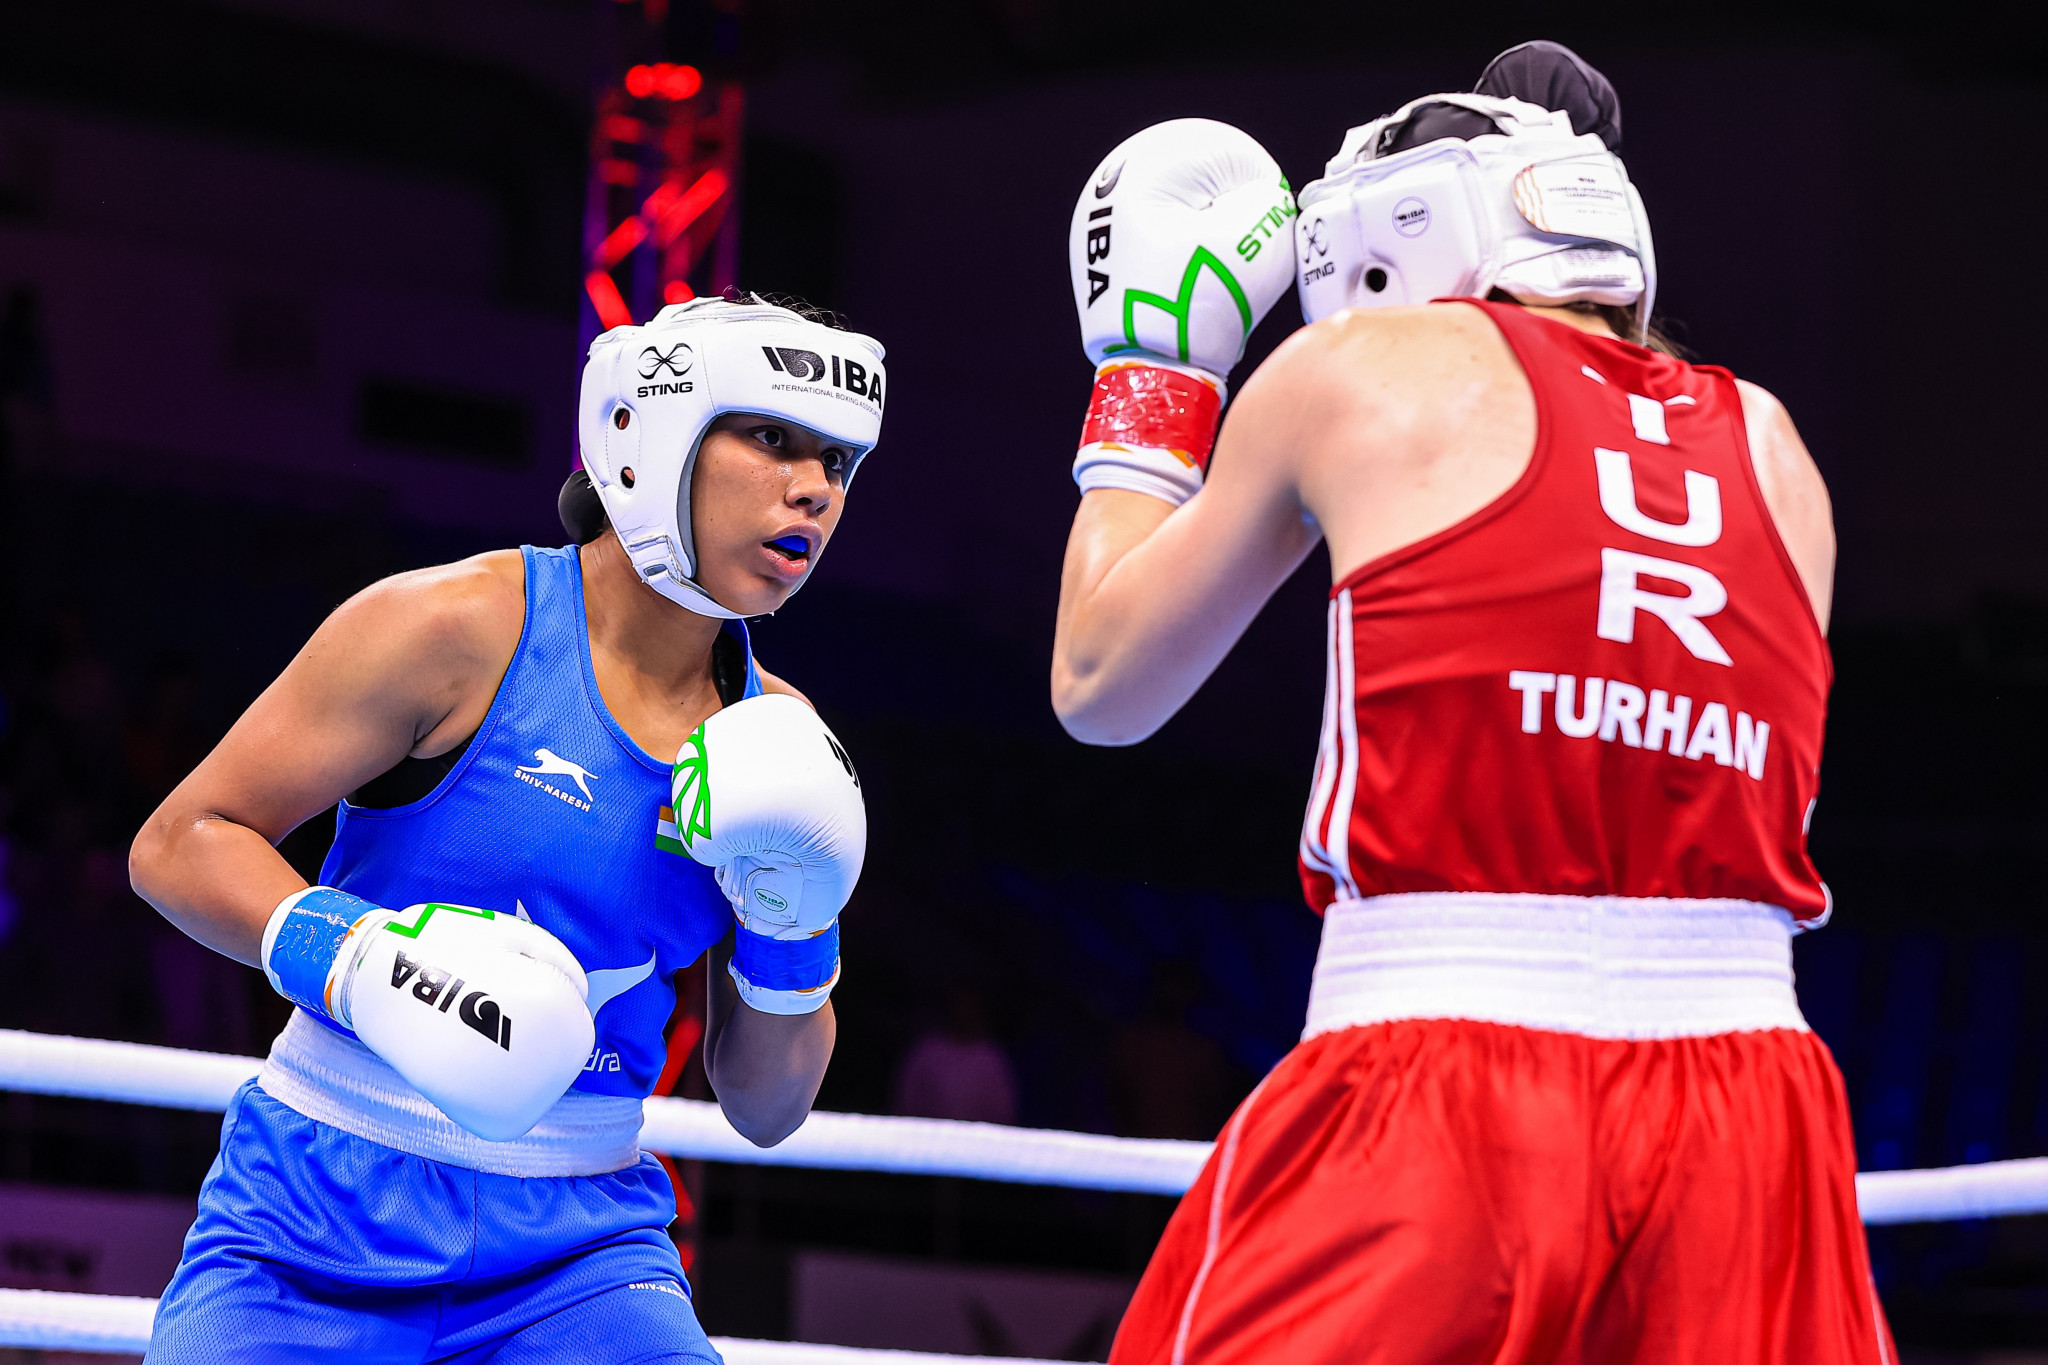 Manisha delivered more success for India when she triumphed against Elif Nur Turhan of Turkey ©IBA